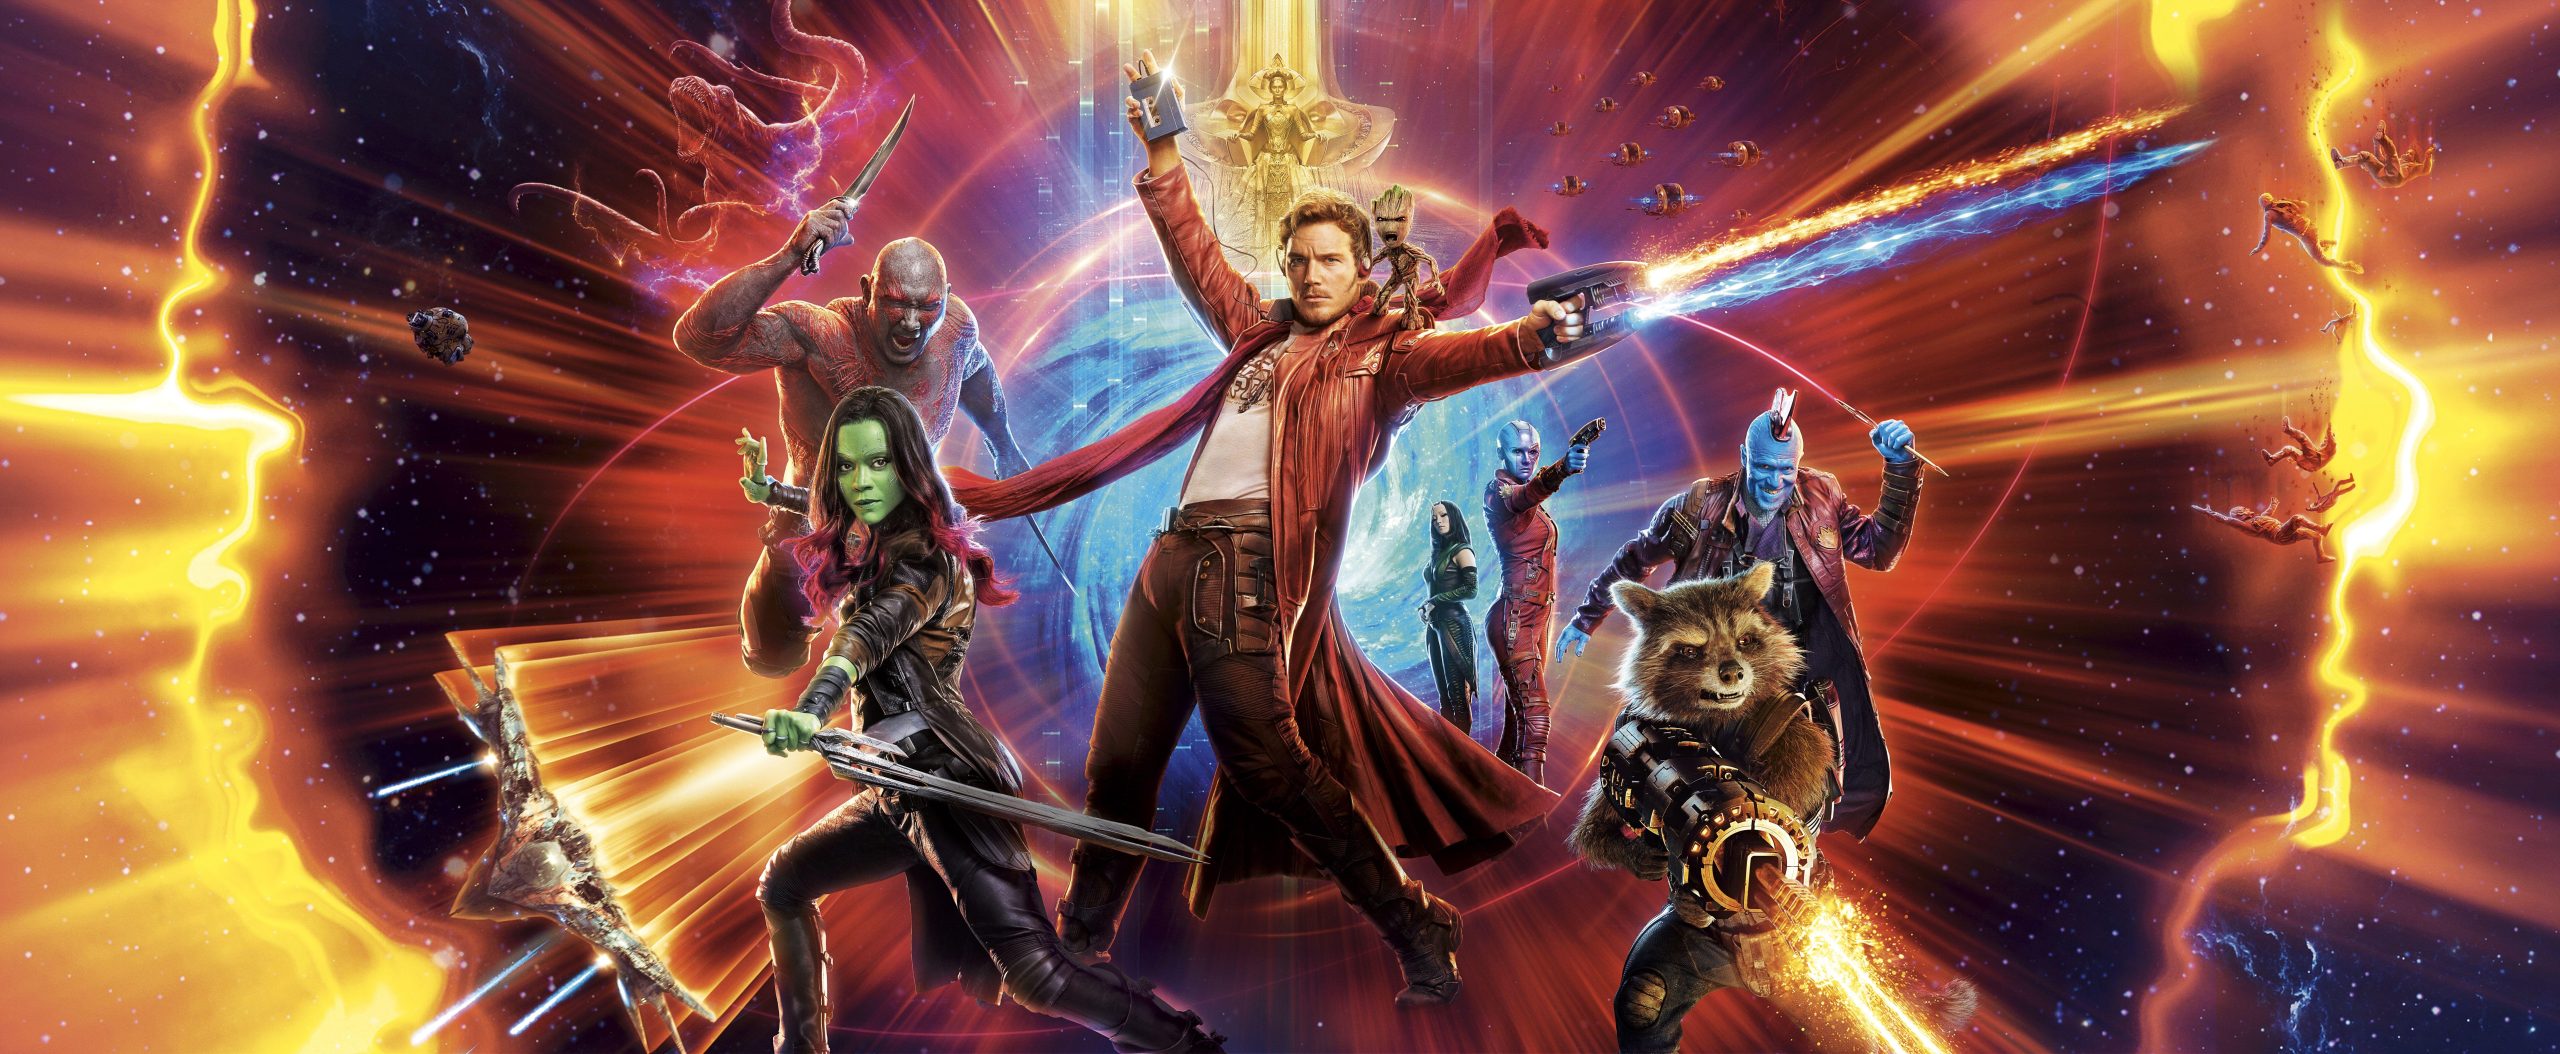 Guardians Of The Galaxy Videogame 1080p Wallpaper